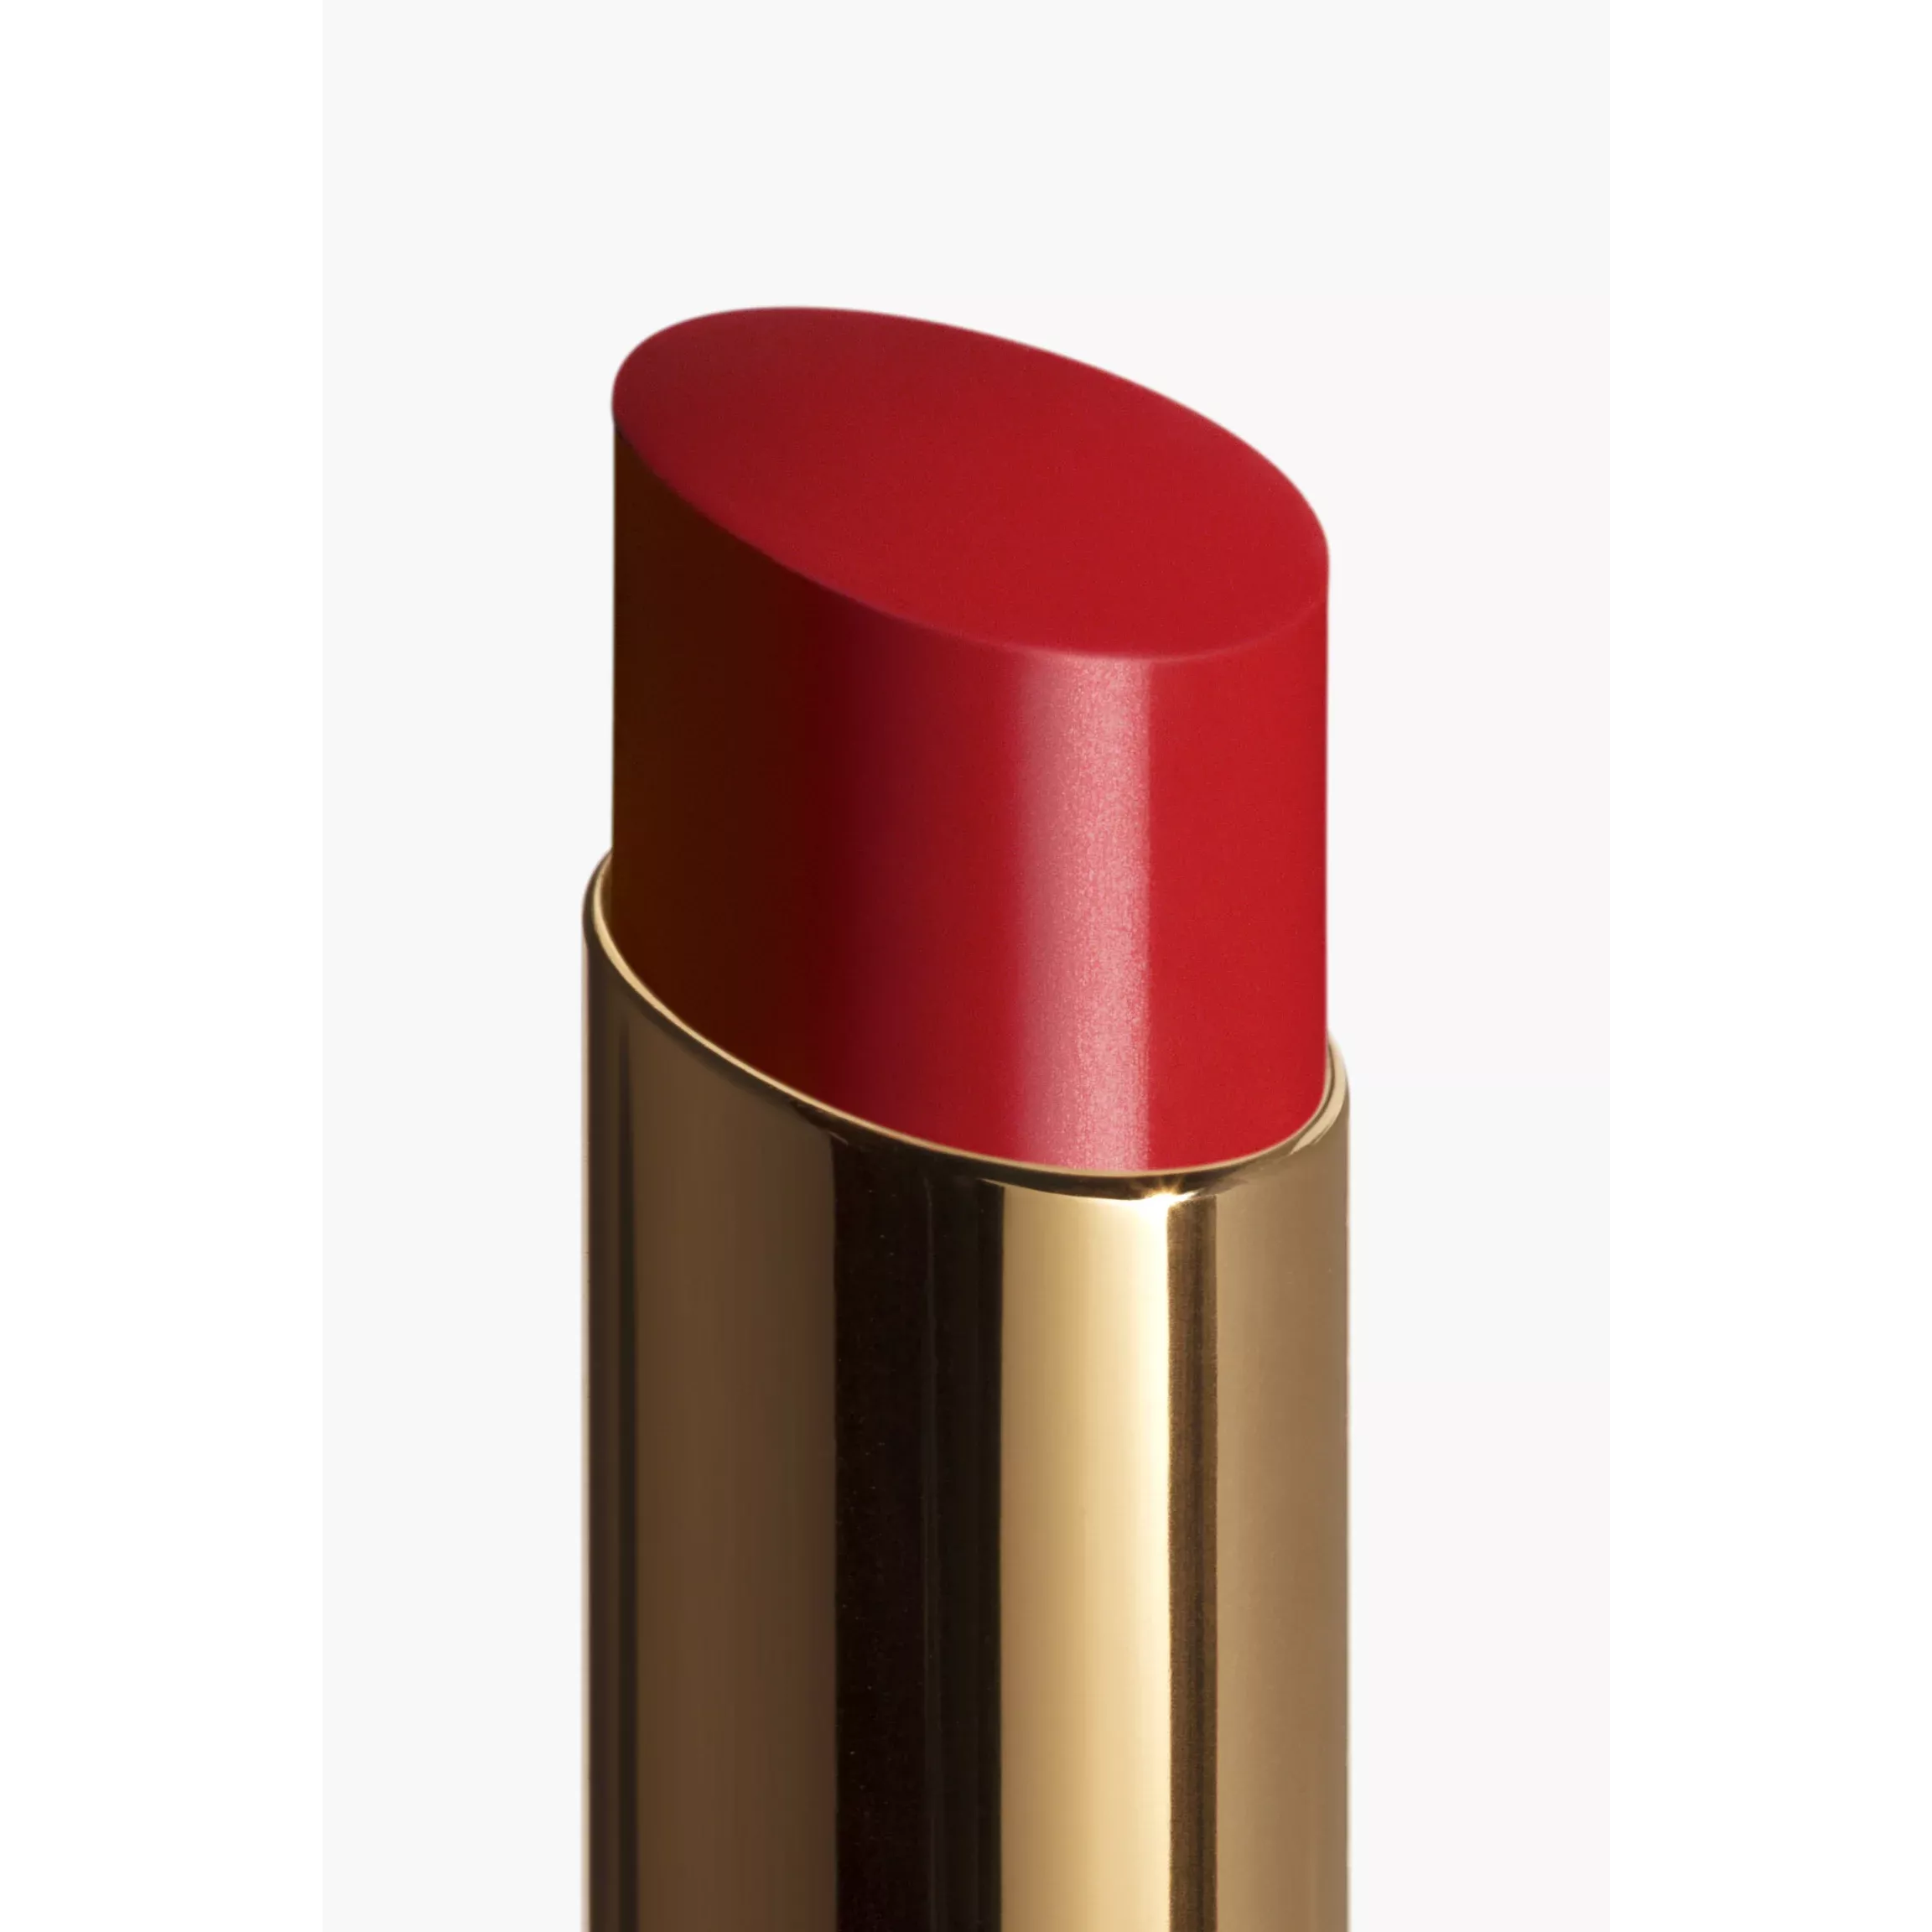 Chanel Flanerie (172) Rouge Coco Flash Lip Colour Review & Swatches